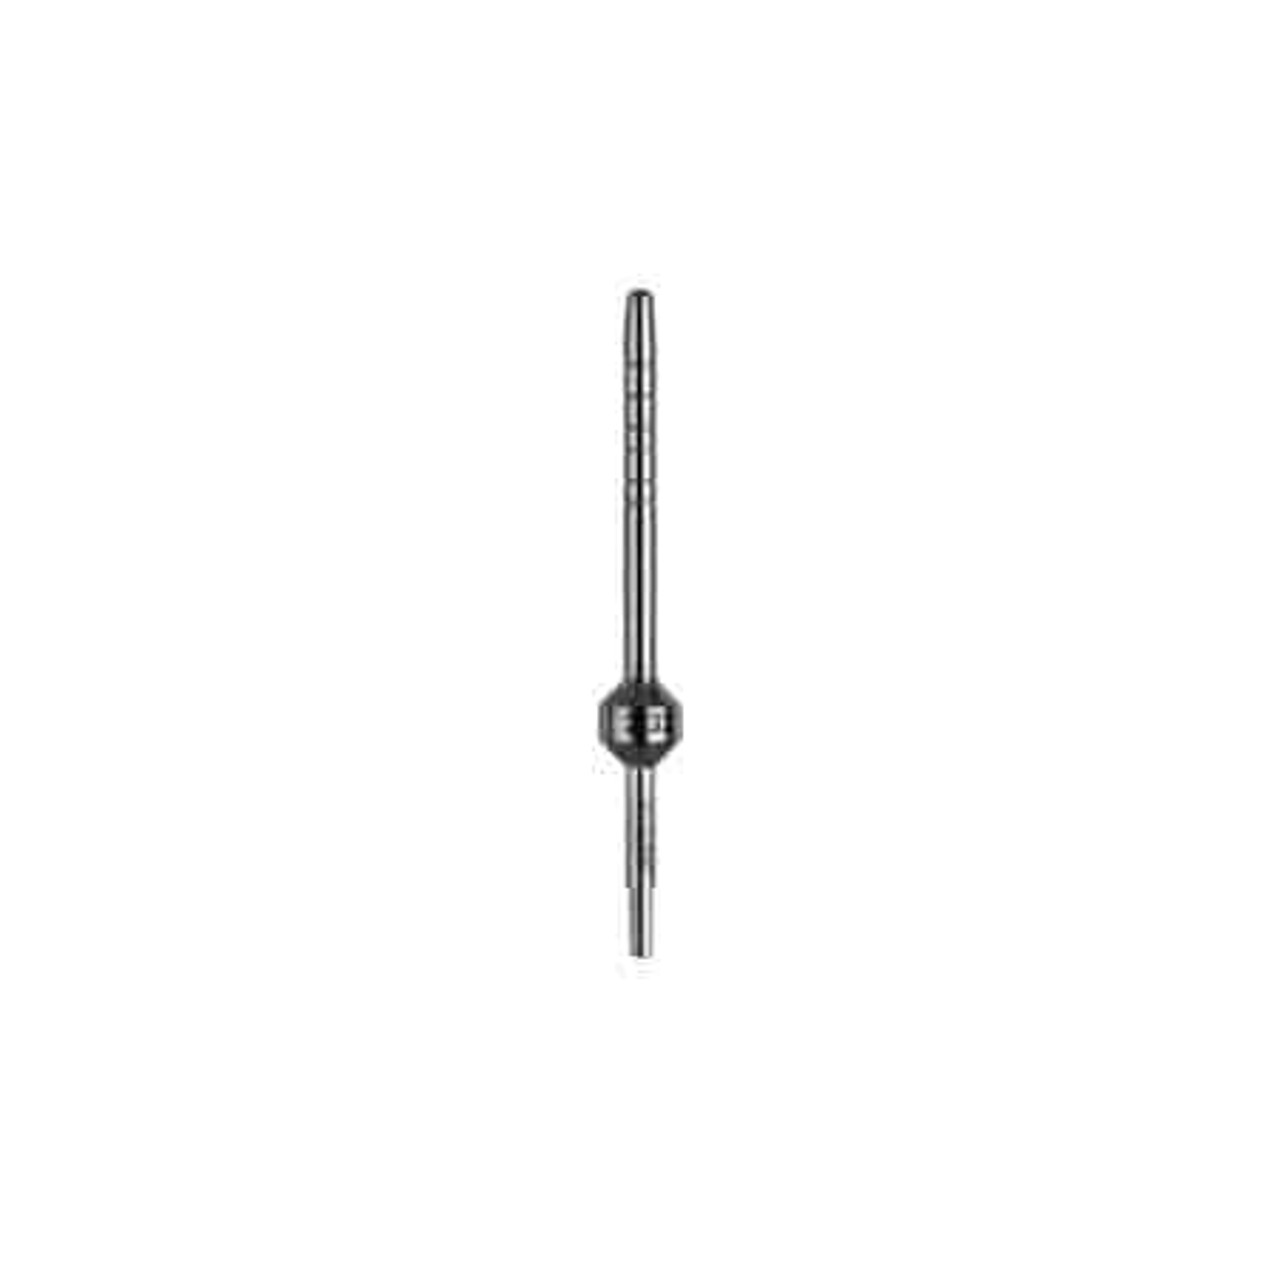 Hu-Friedy - 3.7 mm Osteotome Tapered Convex - Straight Tip